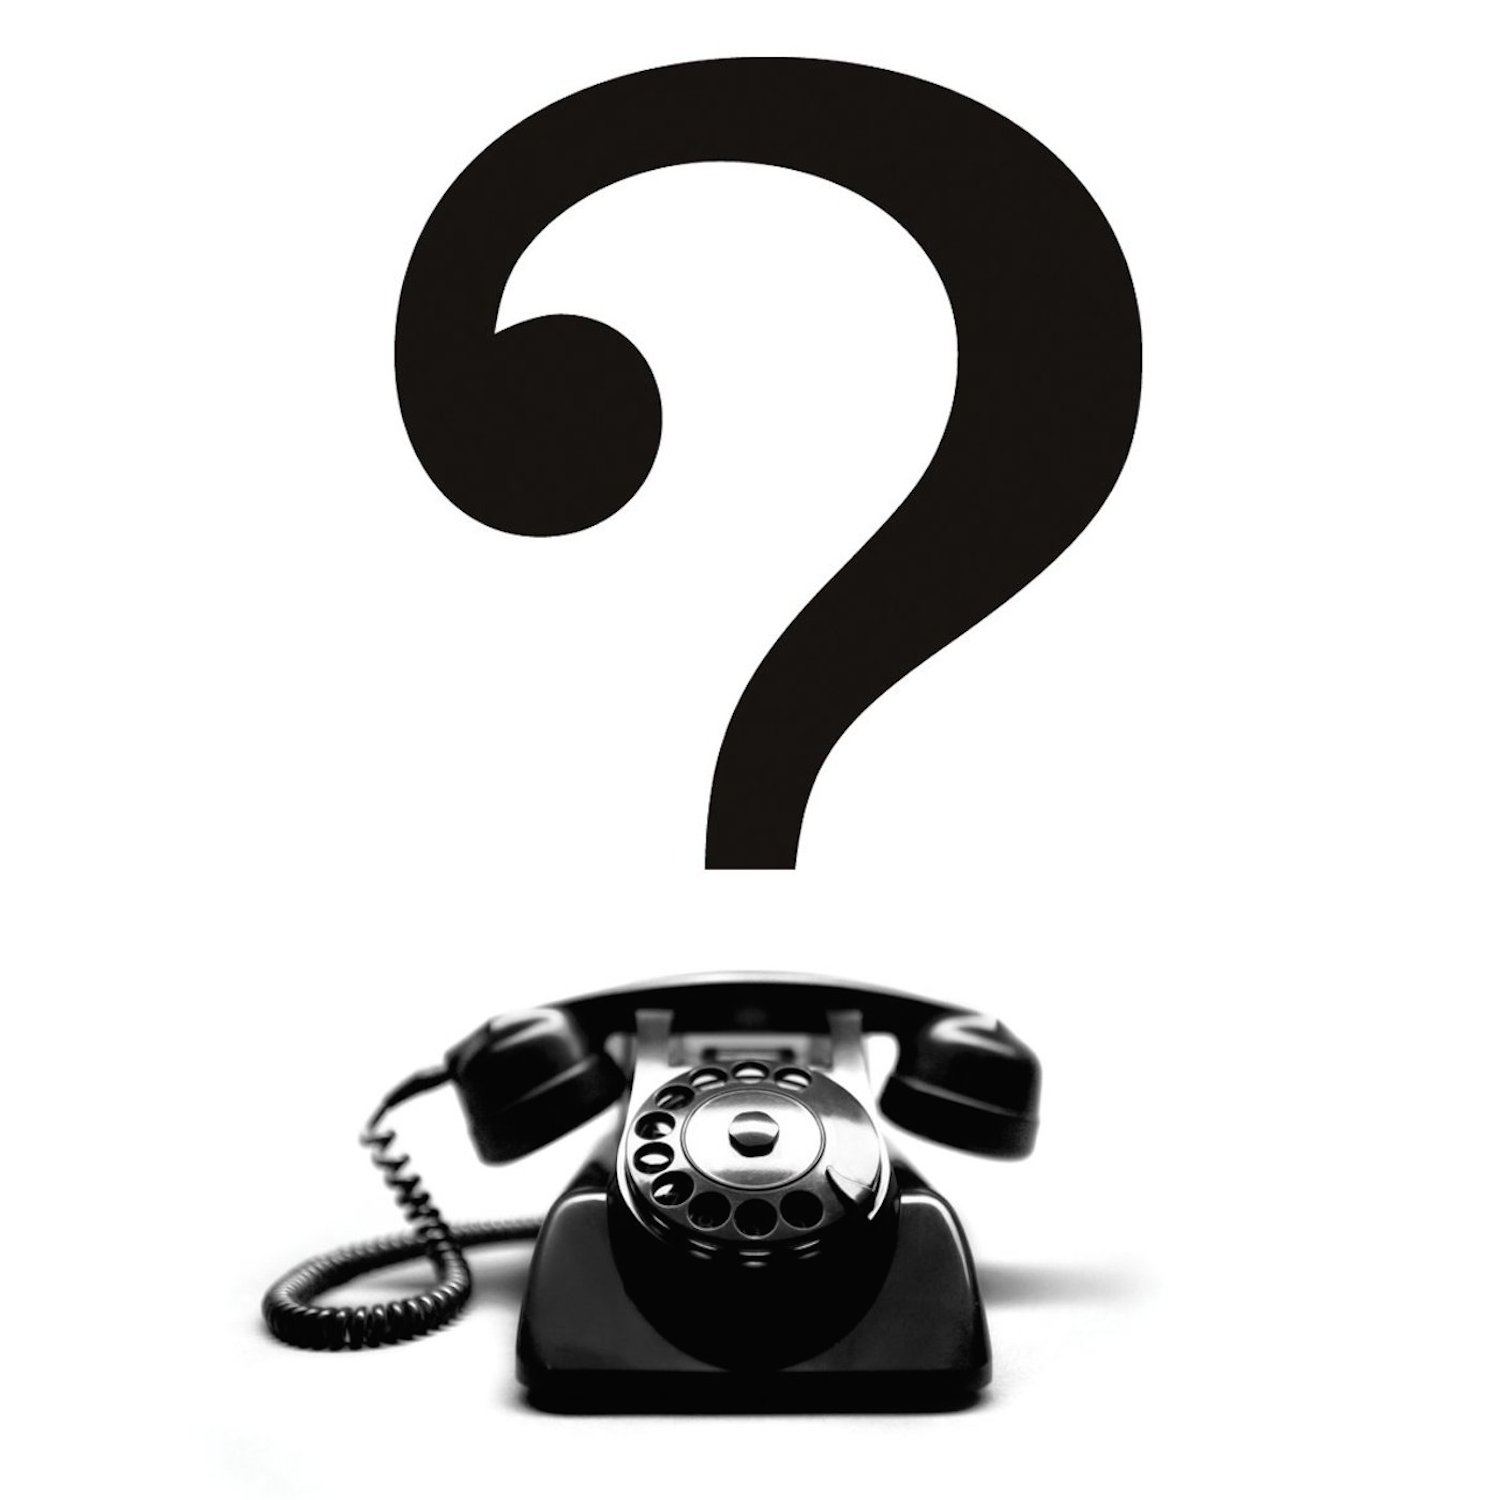 Am I Called - Calling Questions #6 - Why Go To The Gospel Coalition Conference?